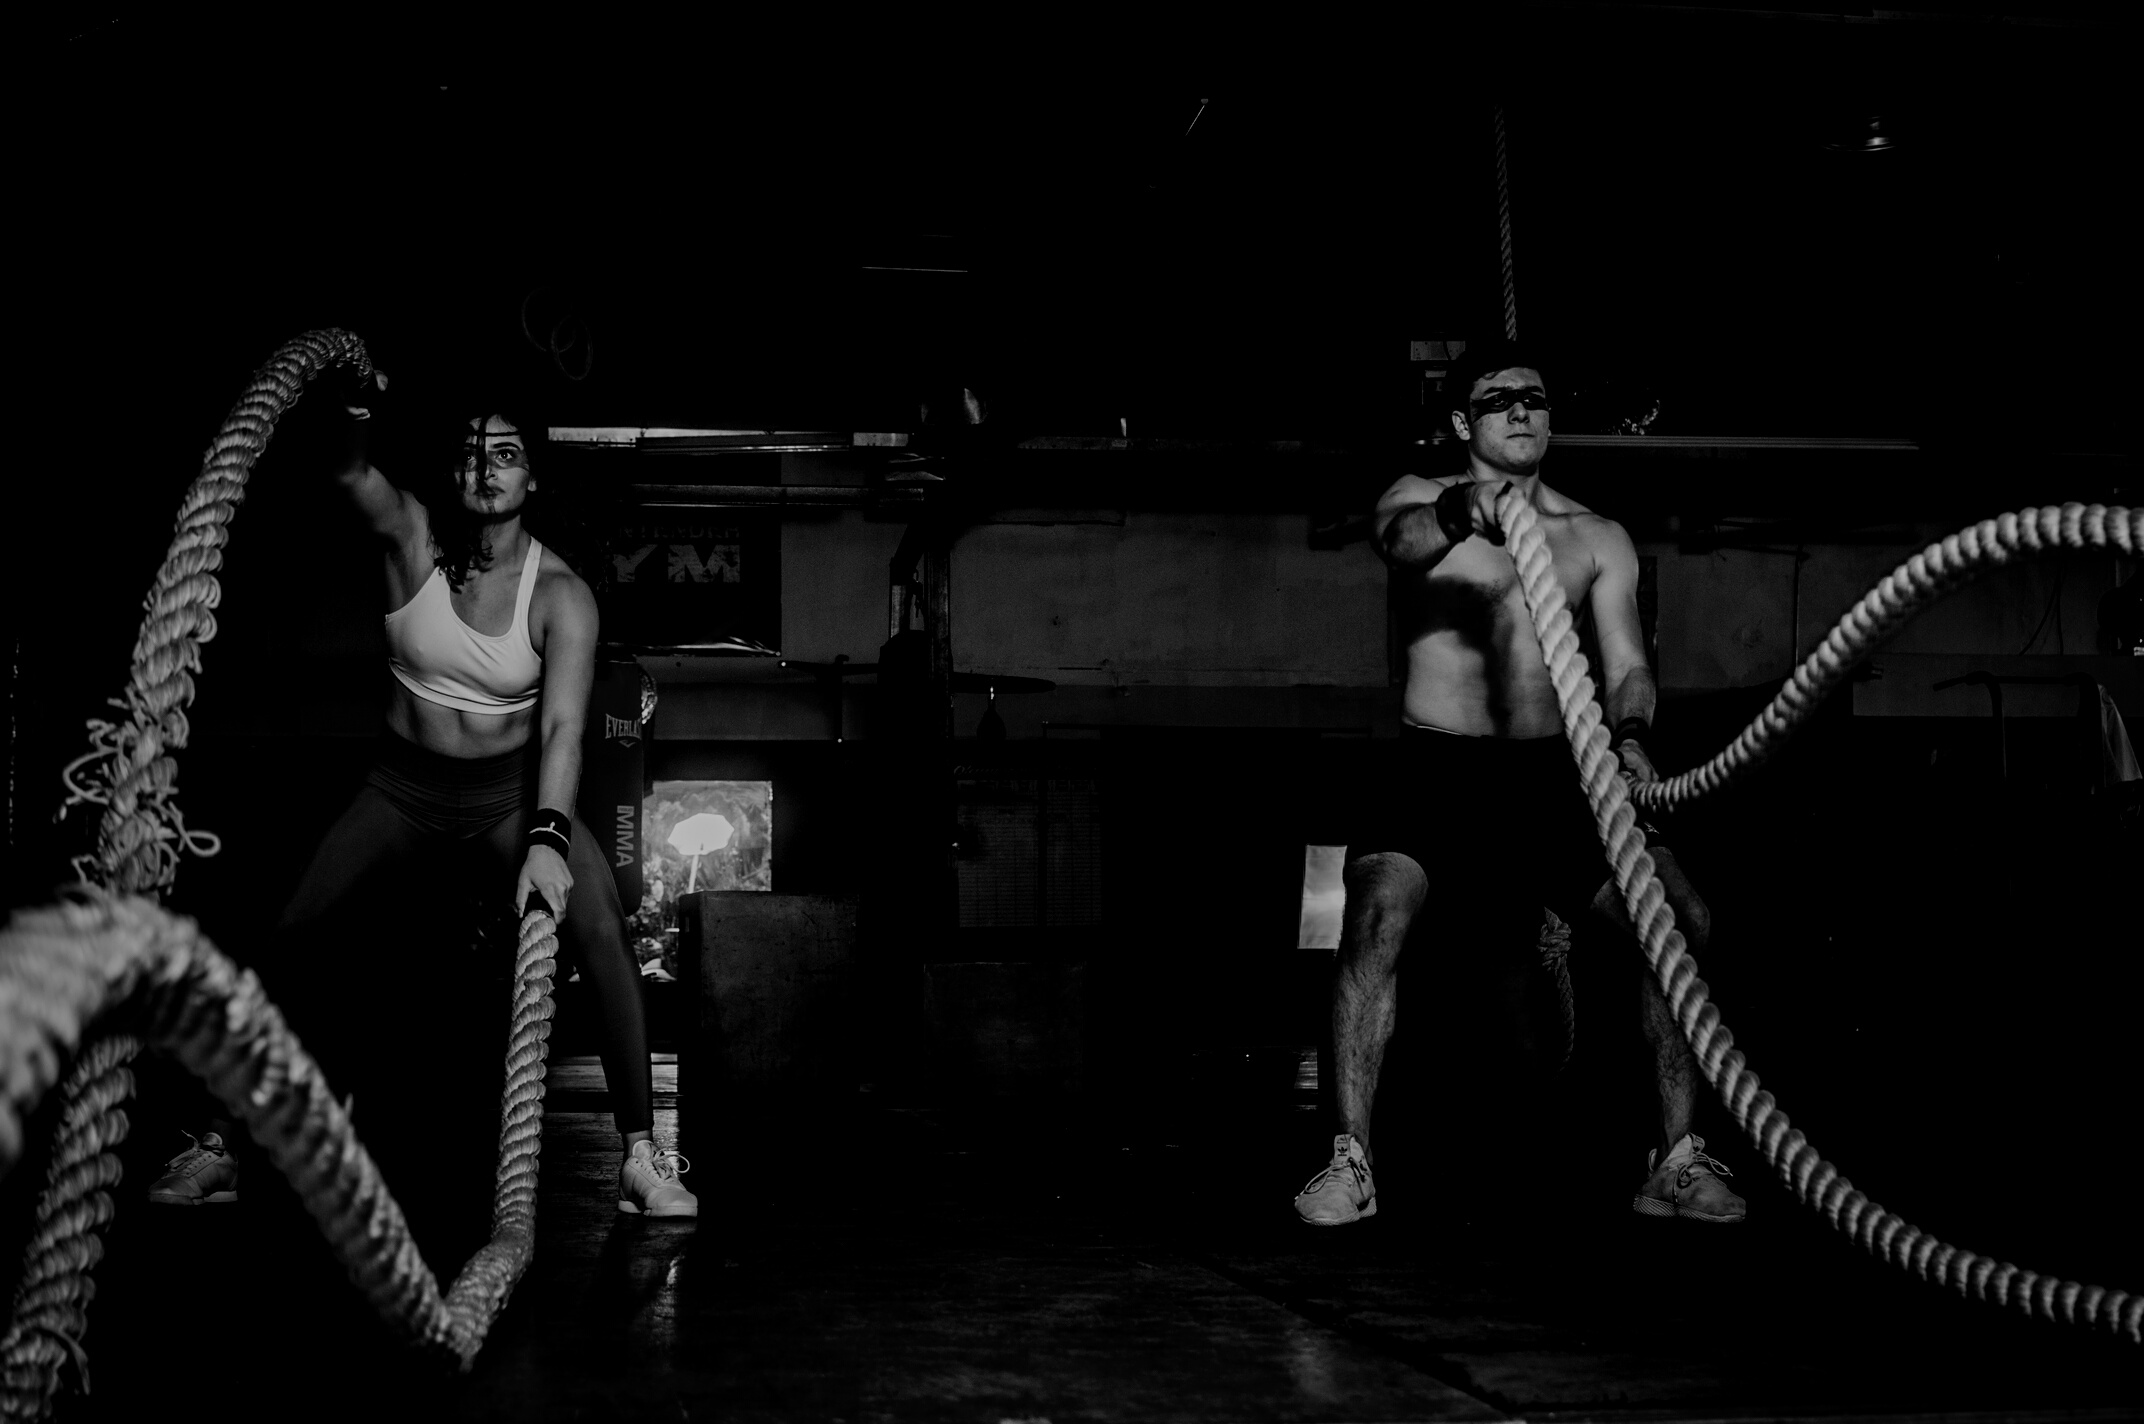 Man And Woman Holding Battle Ropes